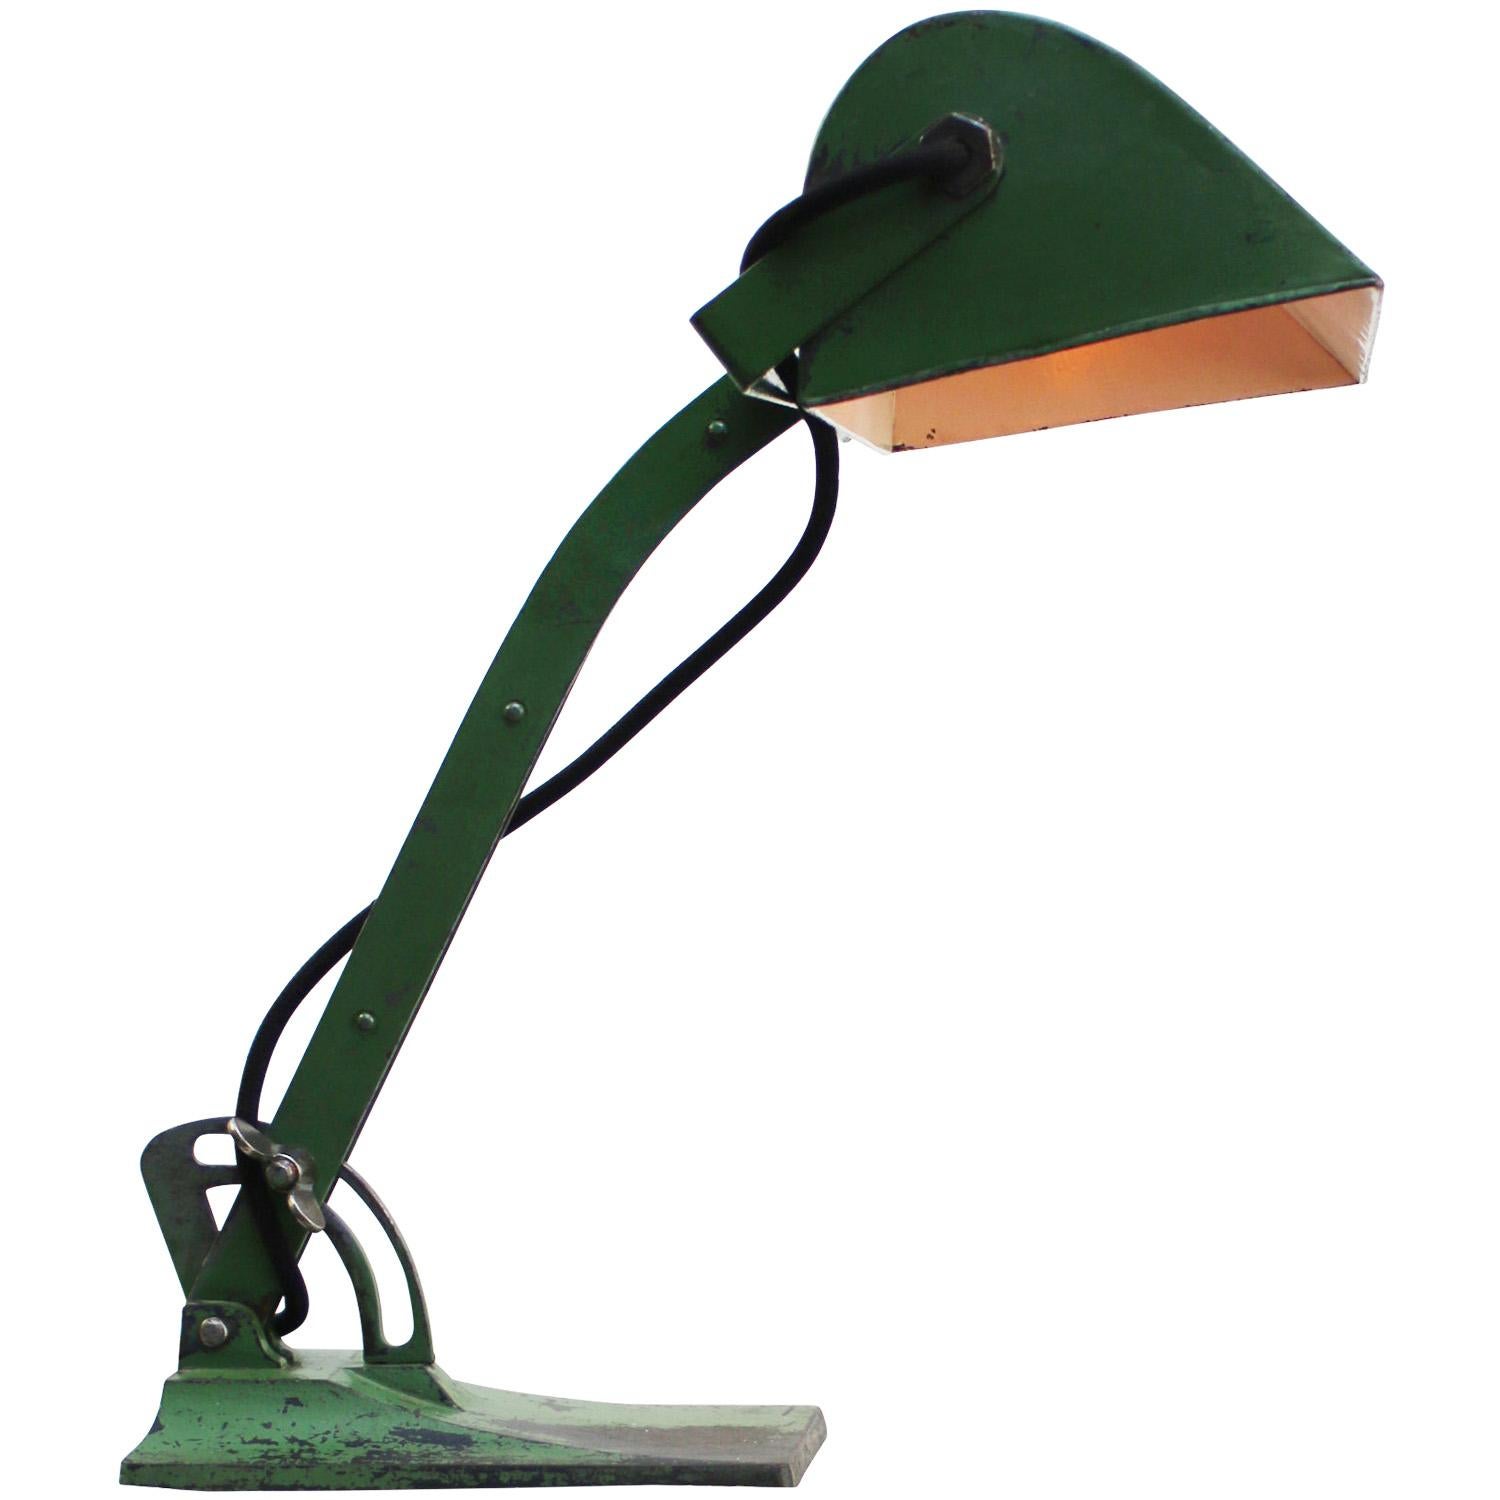 Green metal desk light / banker’s lamp
2,5 meter black cotton flex, plug and switch 

Also available with US/UK plug

Weight: 3.00 kg / 6.6 lb

Priced per individual item. All lamps have been made suitable by international standards for incandescent